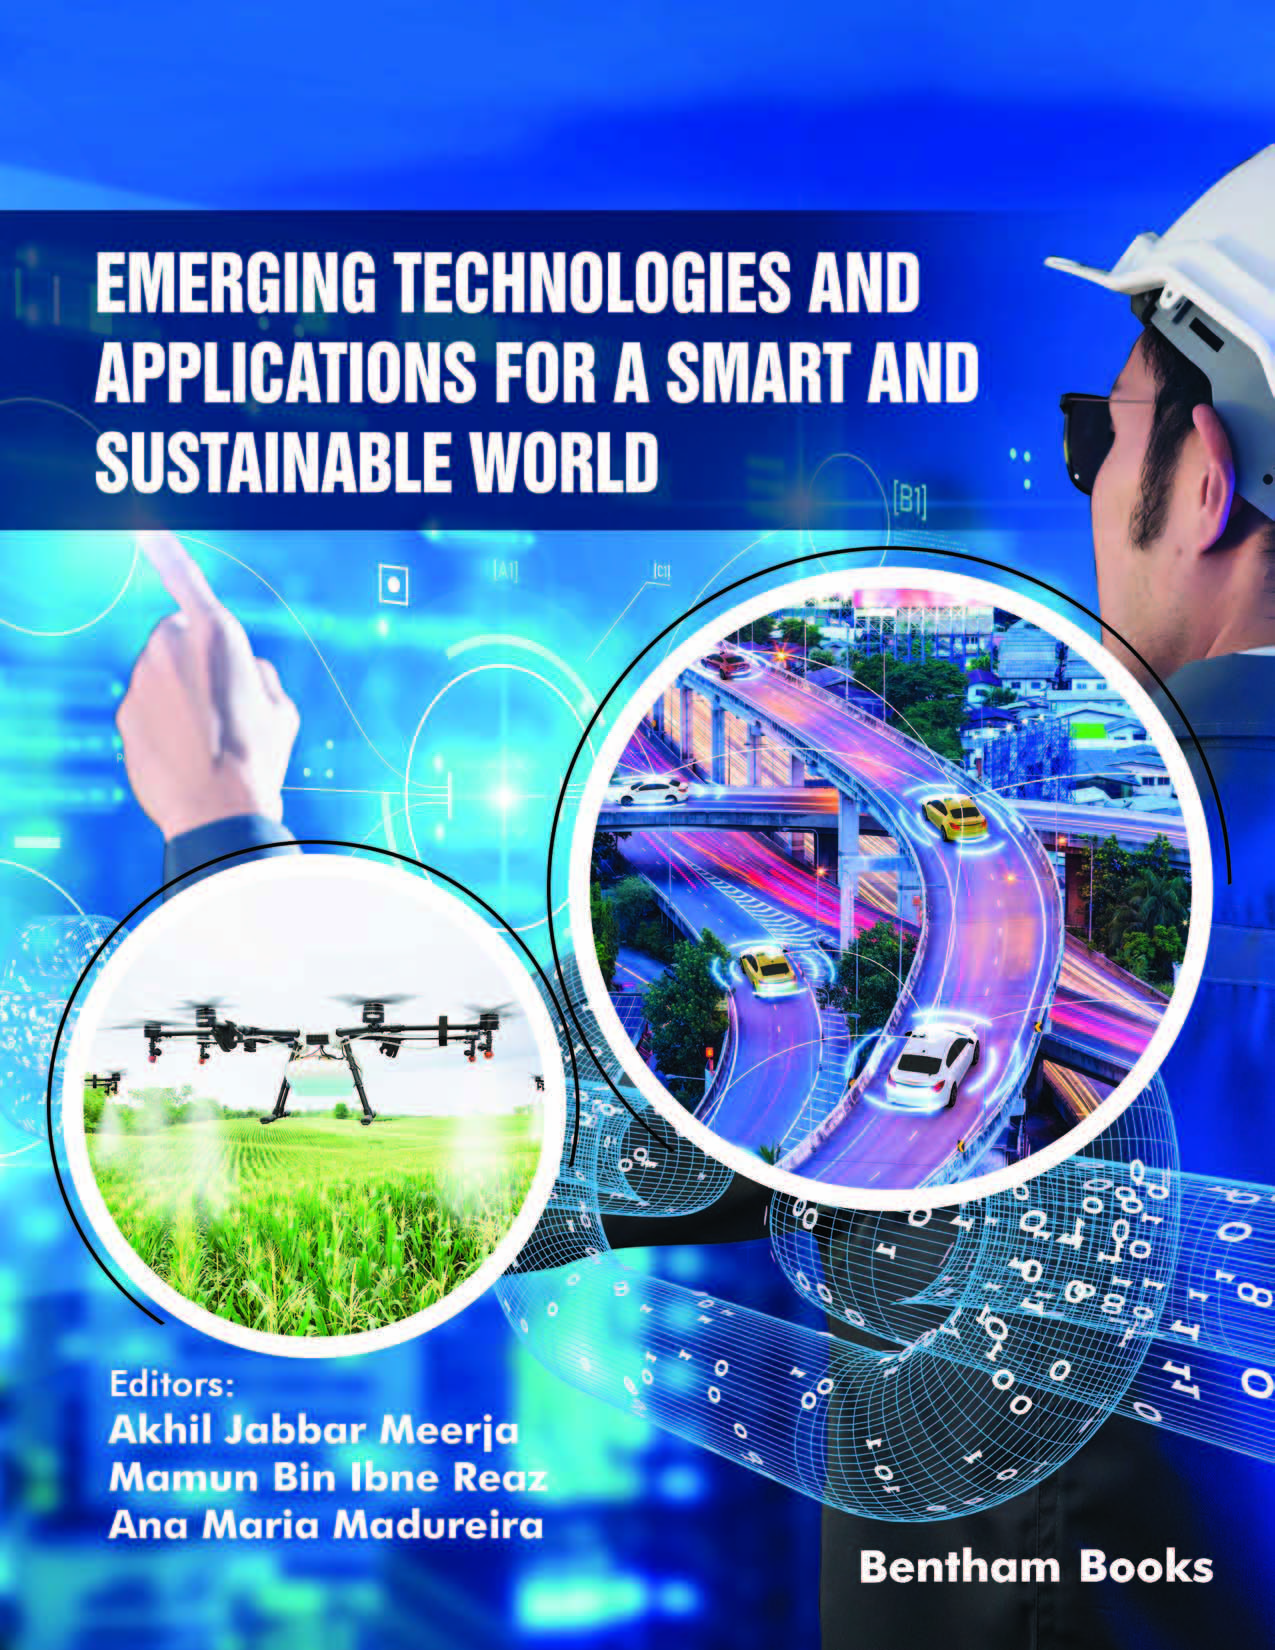 Emerging Technologies and Applications for a Smart and Sustainable World